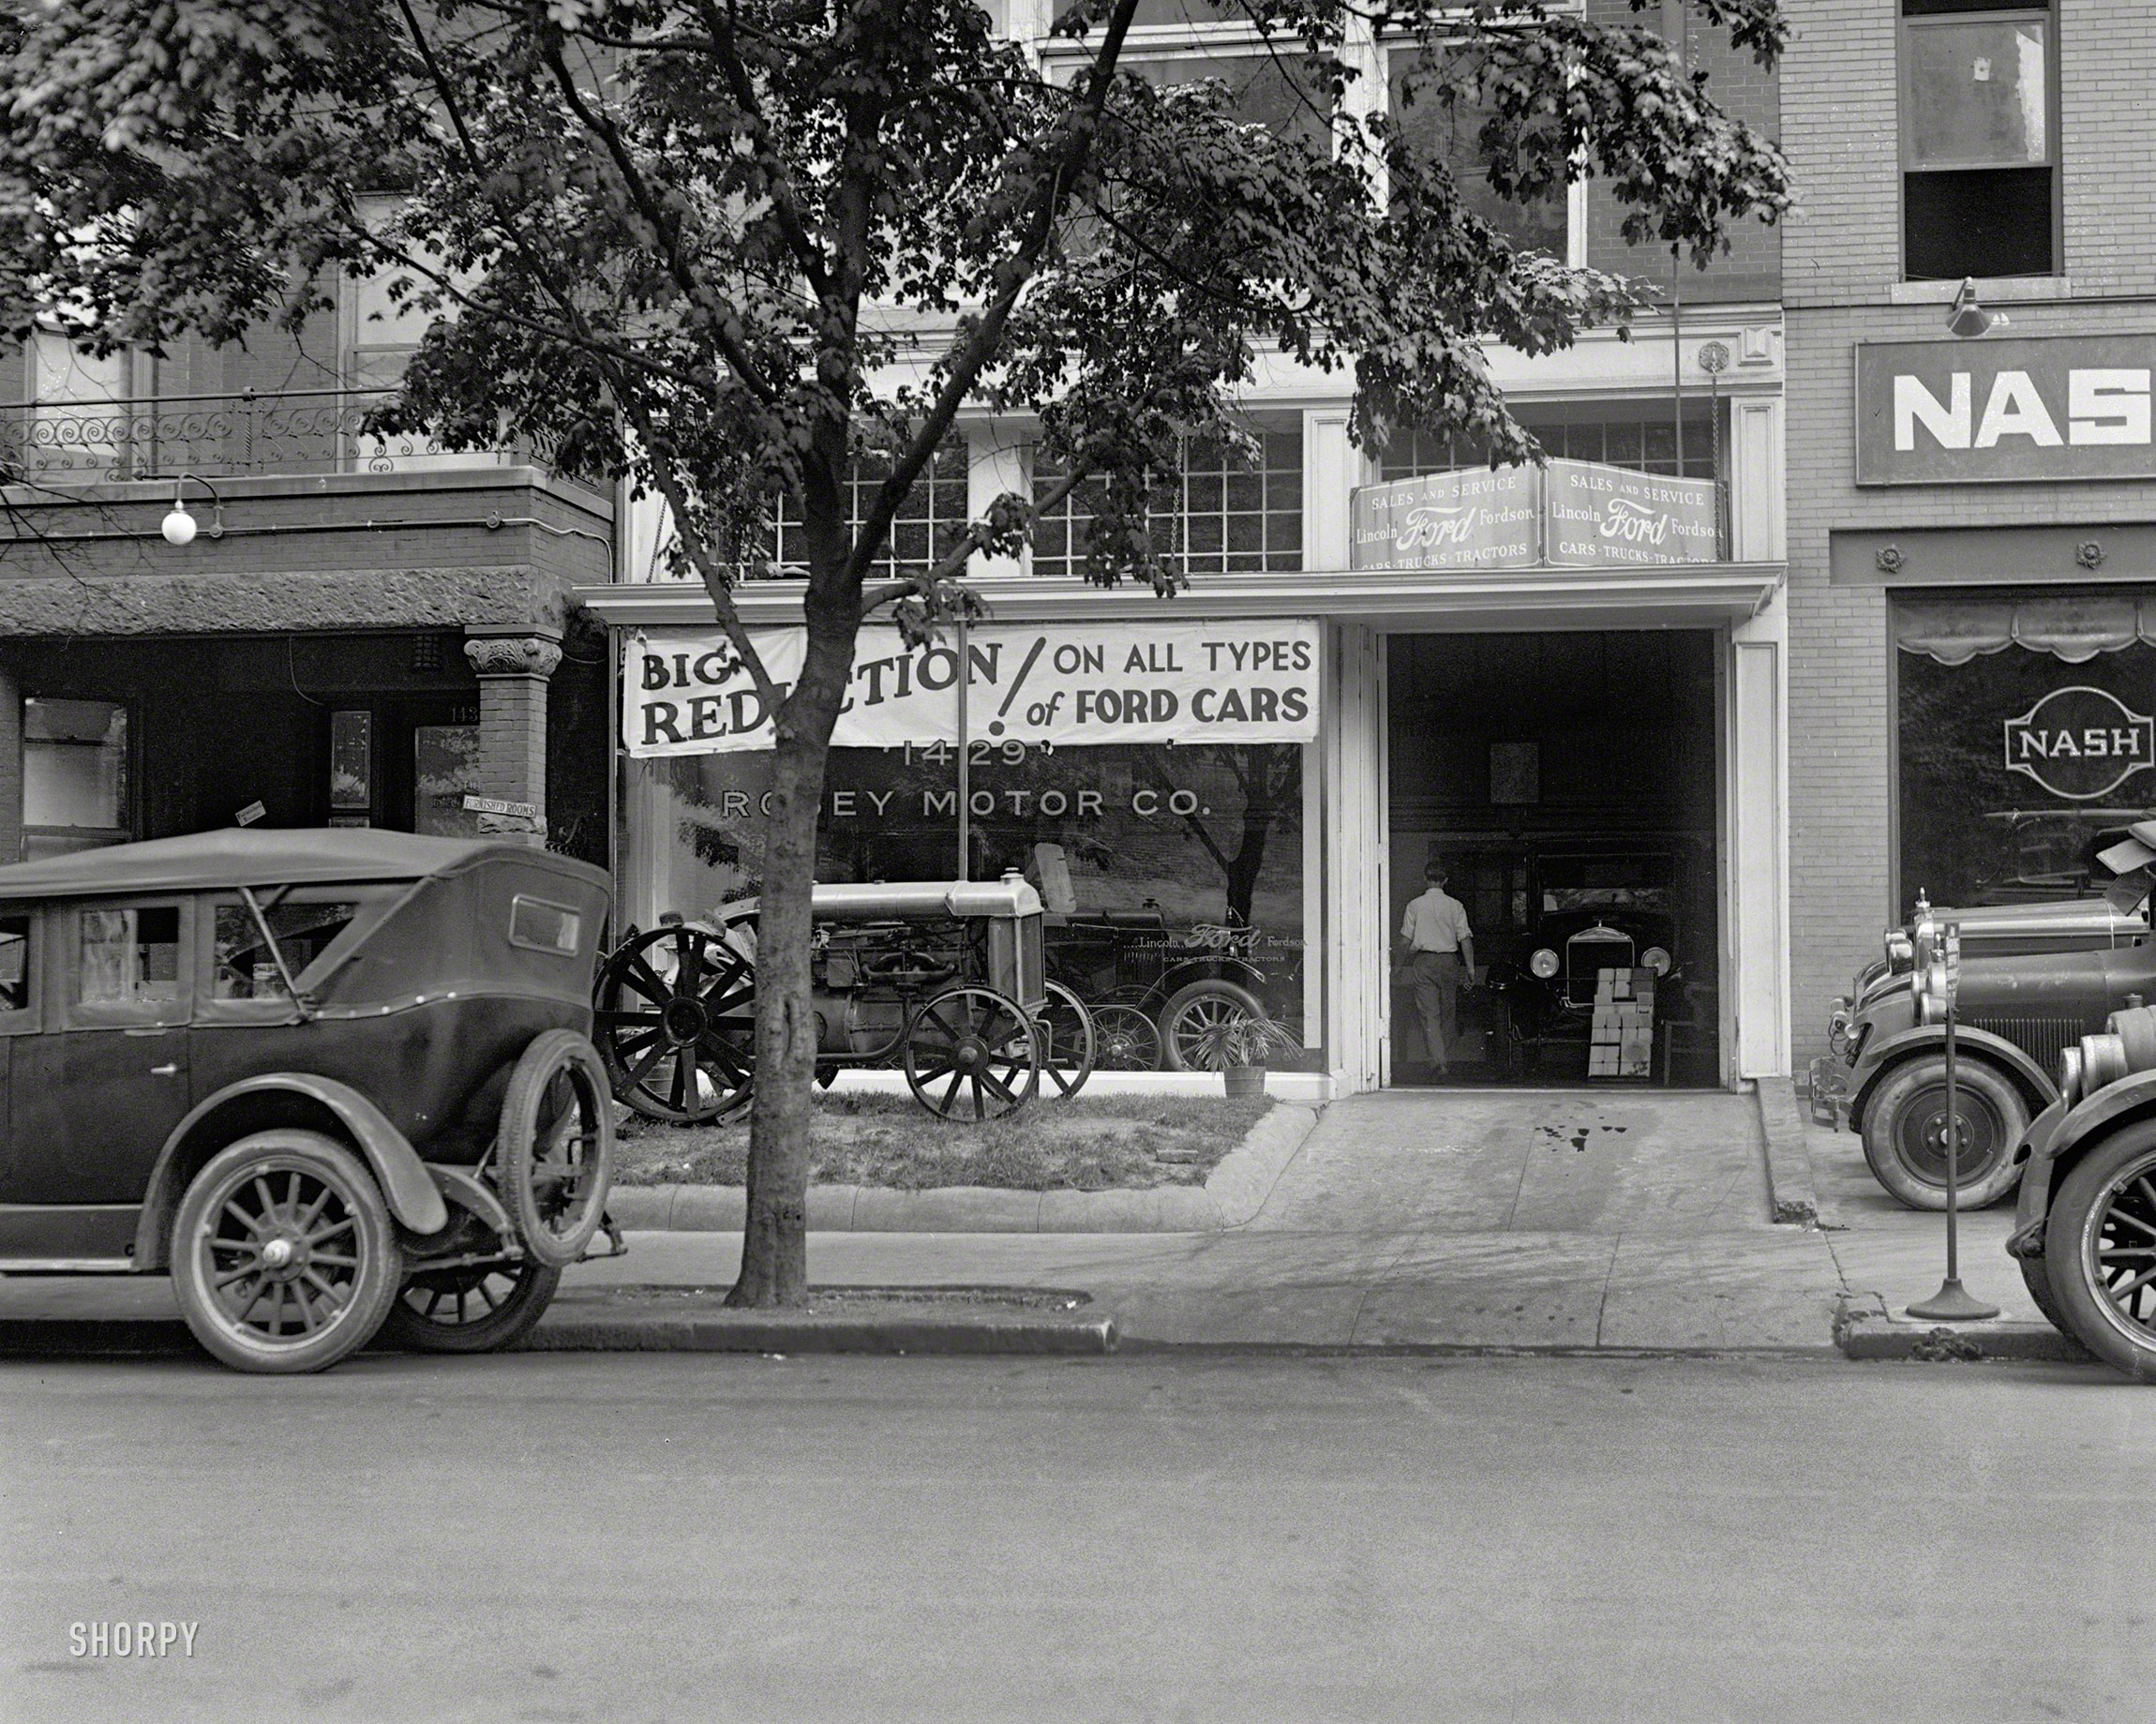 Washington, D.C., in 1926. "Robey Motor Co. -- 1429 L Street." As long as we're downtown, let's pick up a tractor. National Photo glass negative. View full size.